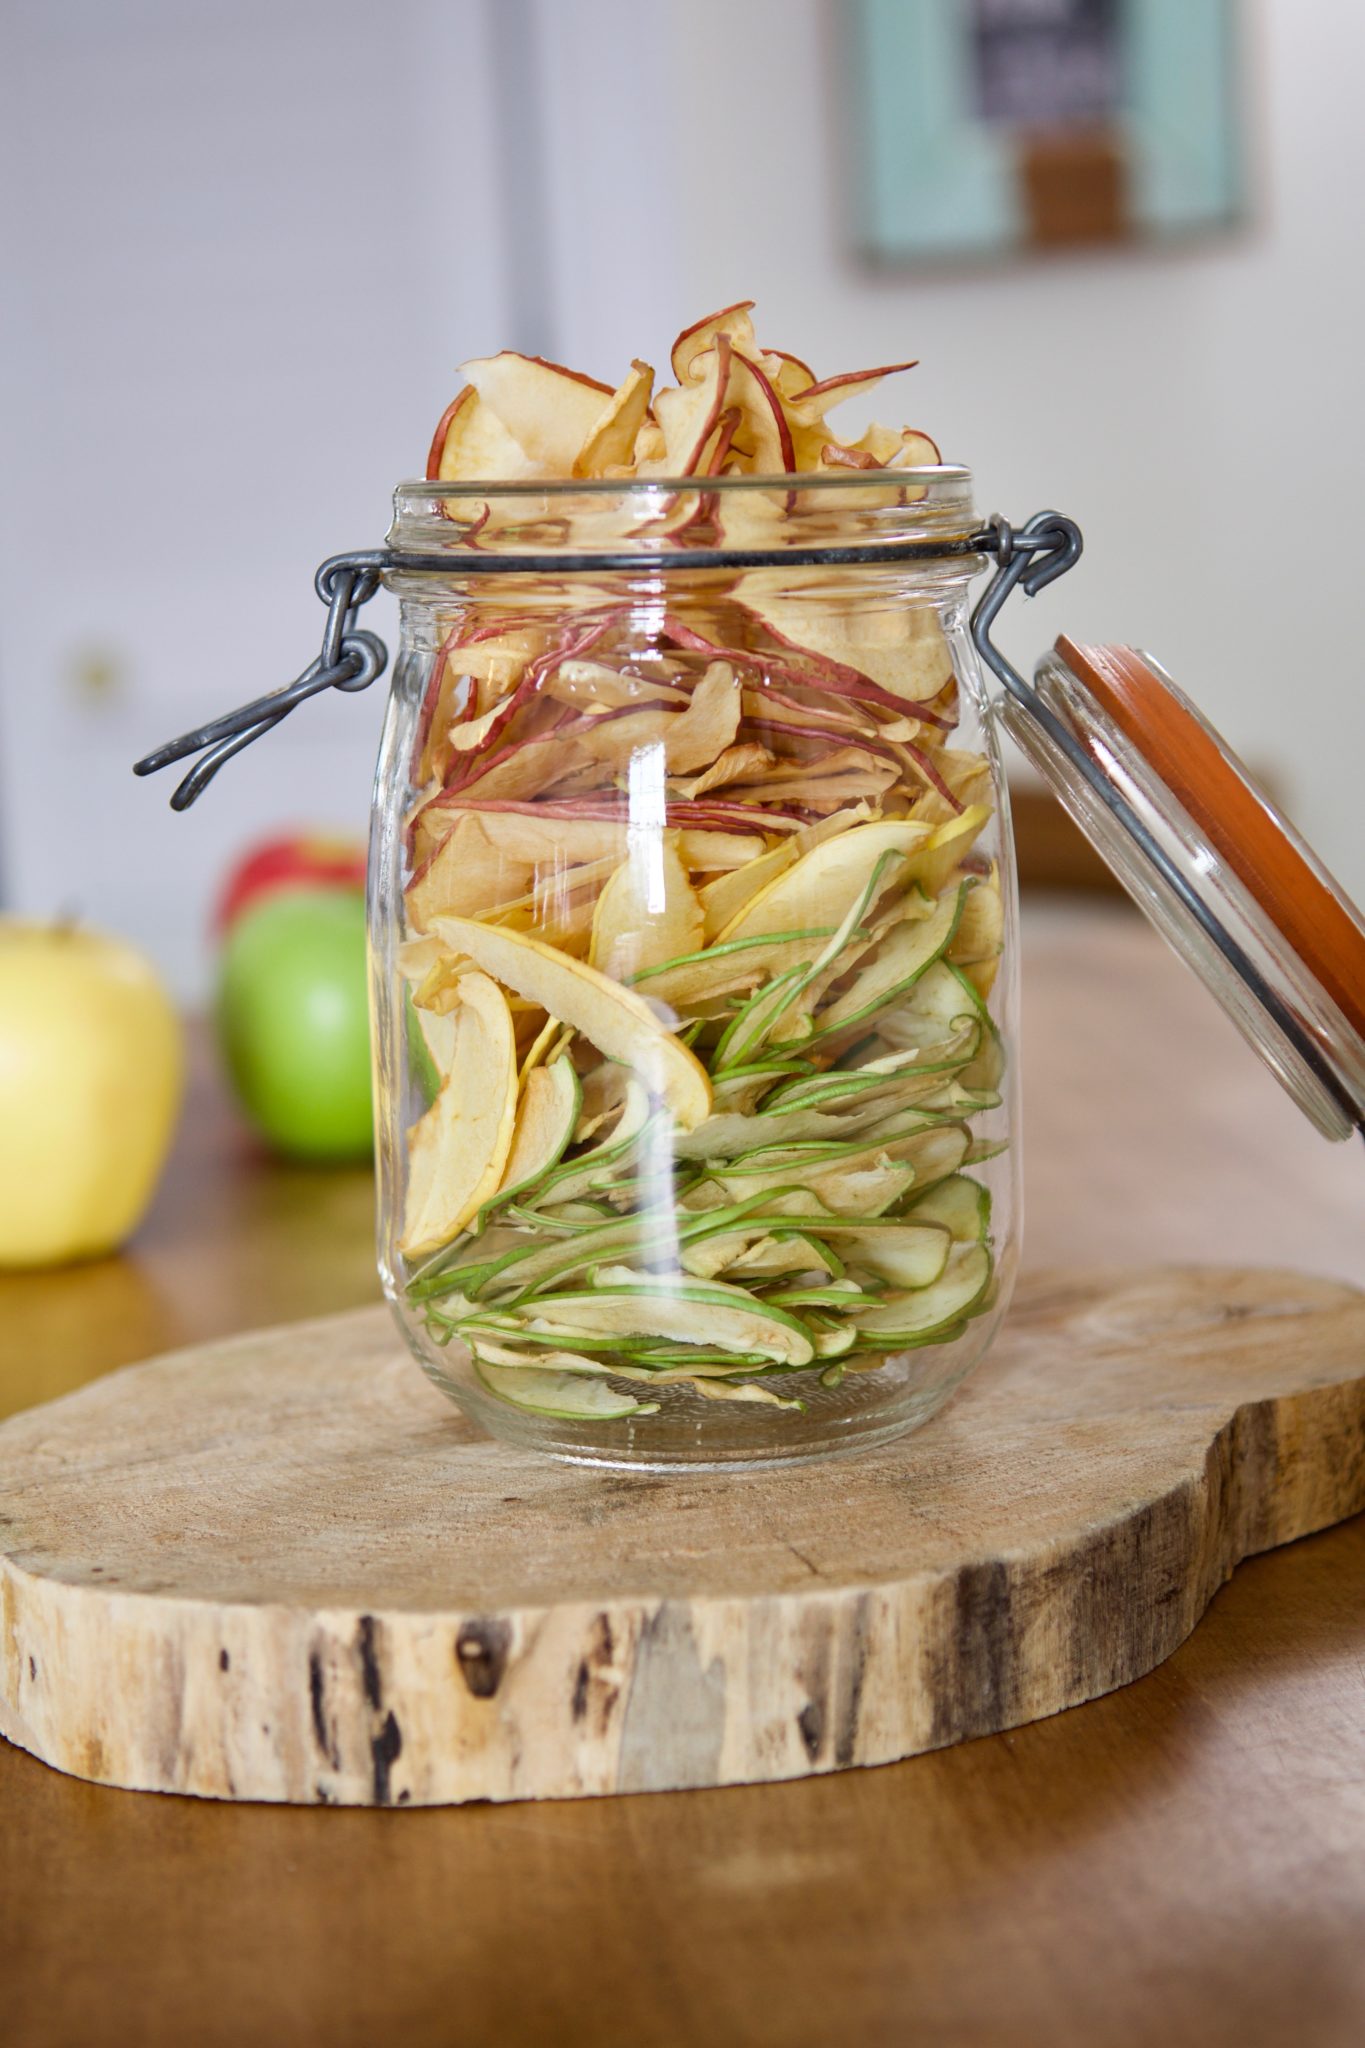 Dehydrated apples